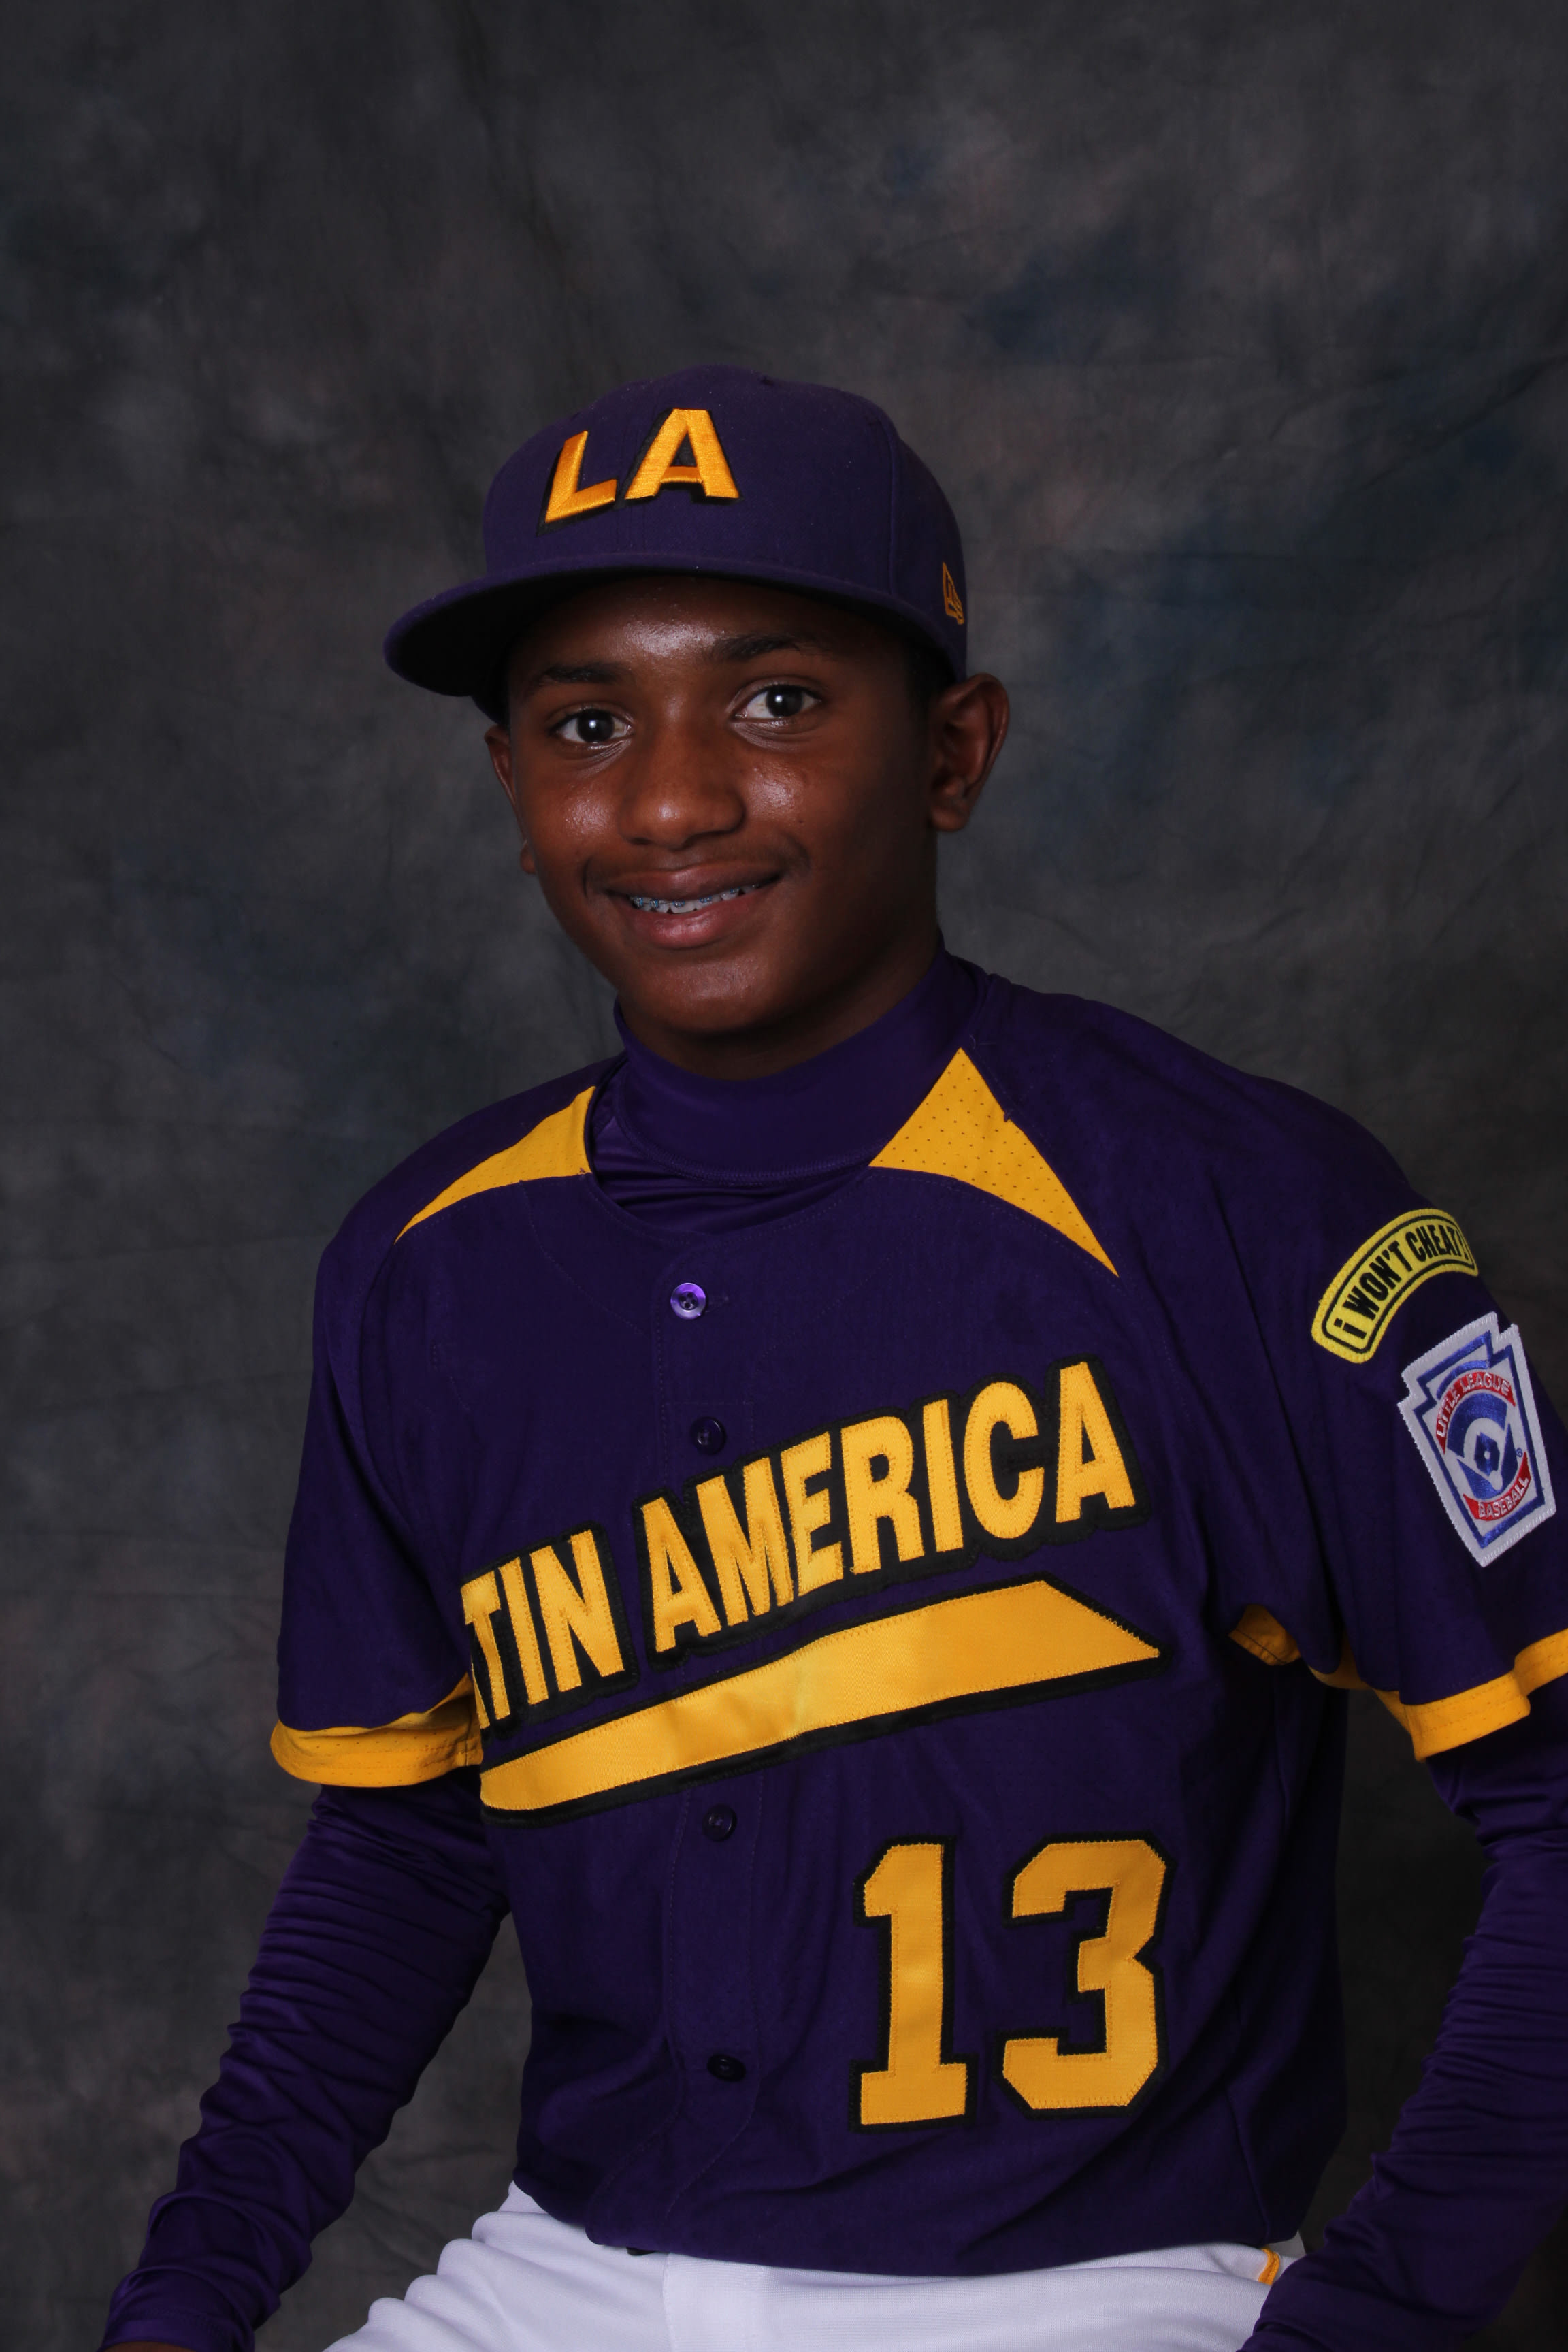 Little League World Series: 13 active MLB players who played in it